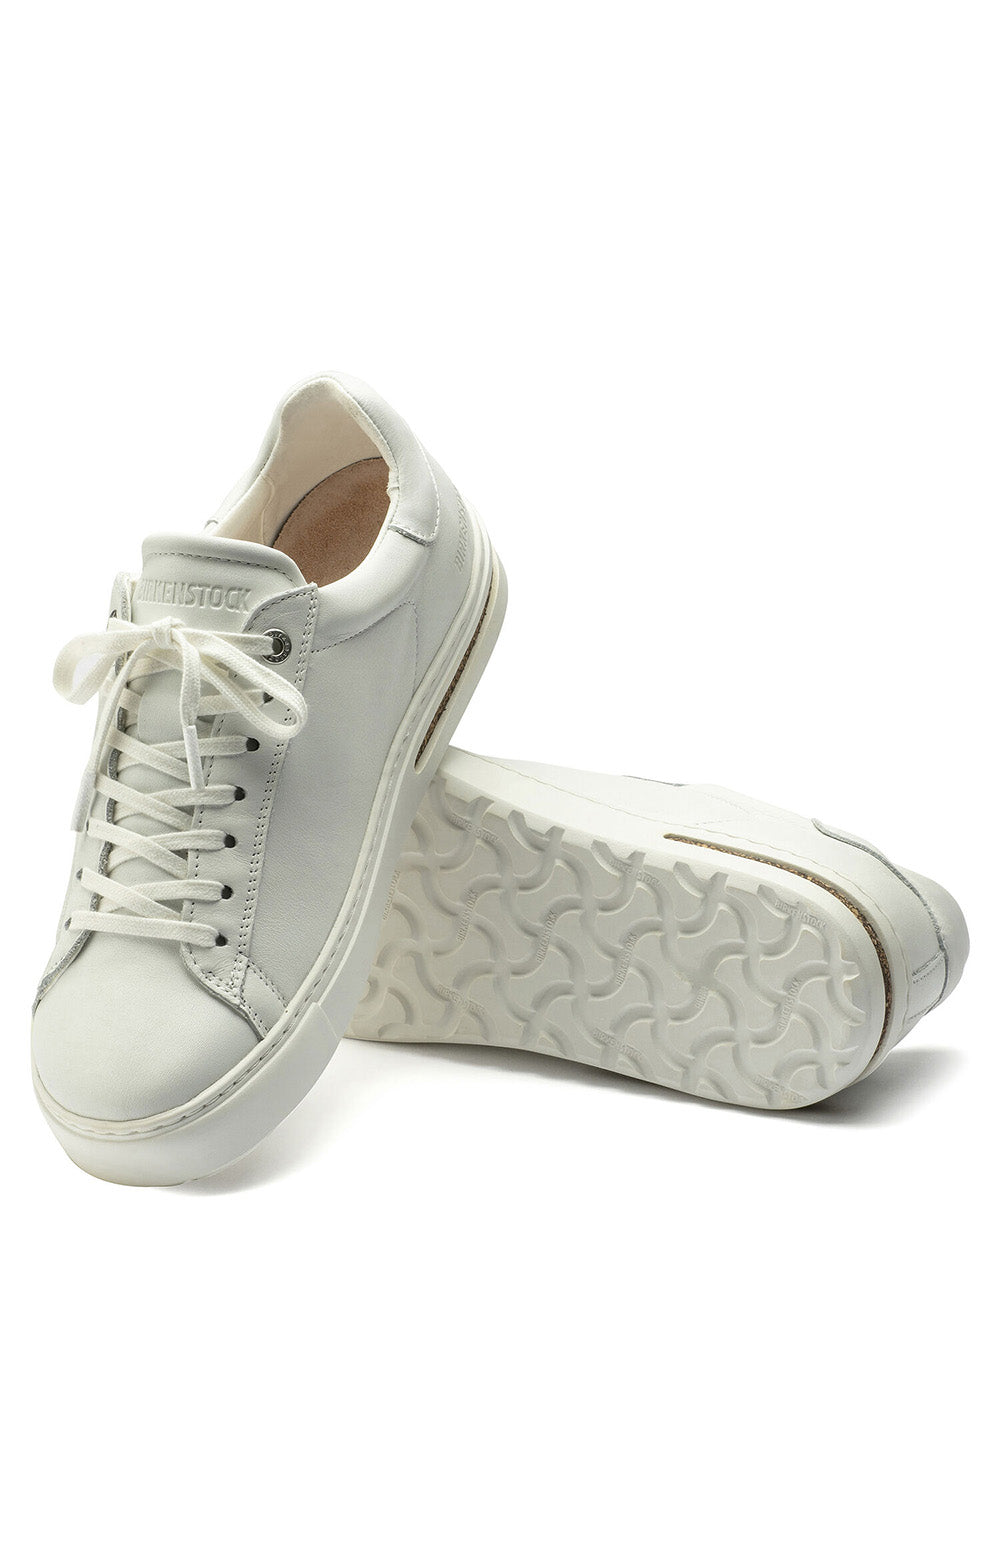 (1017723) Bend Low Shoes White